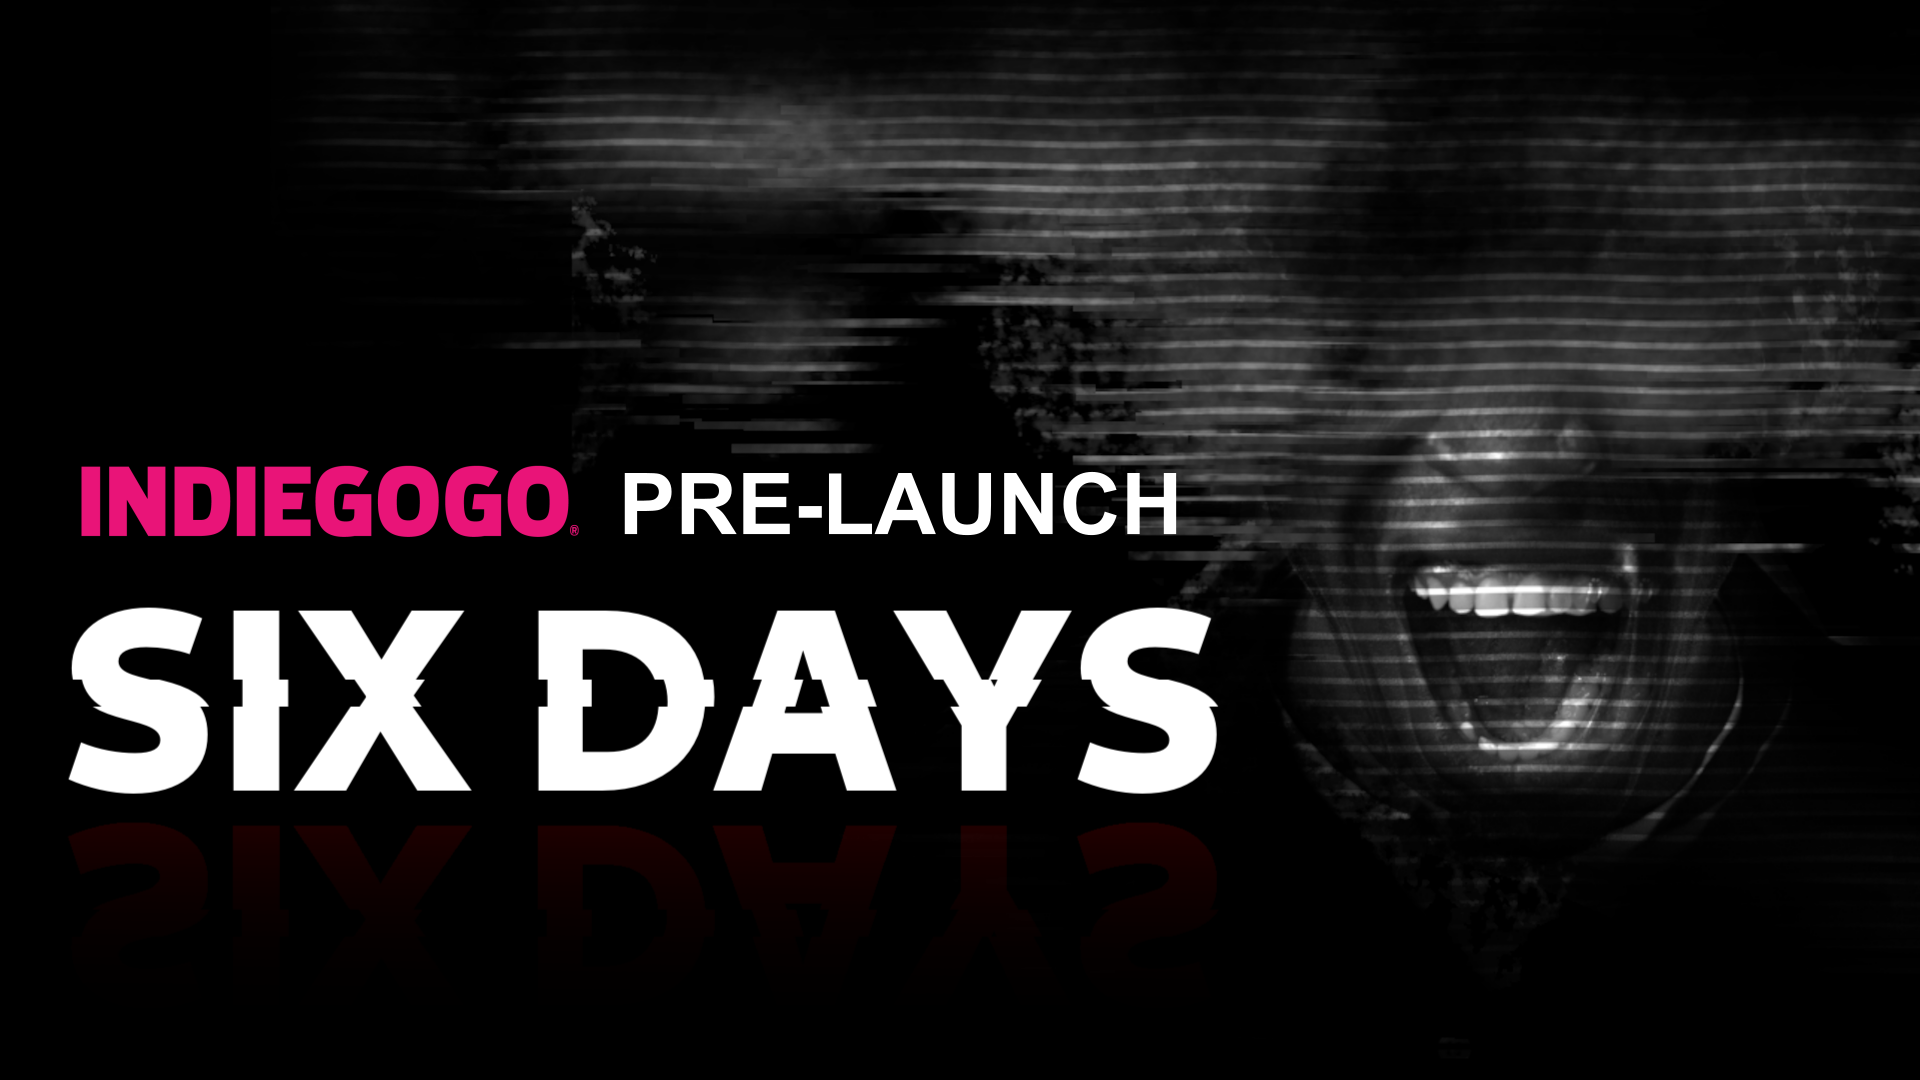 🚀 Exciting News: SIX DAYS Pre-Launch Campaign is Live on Indiegogo! 🚀